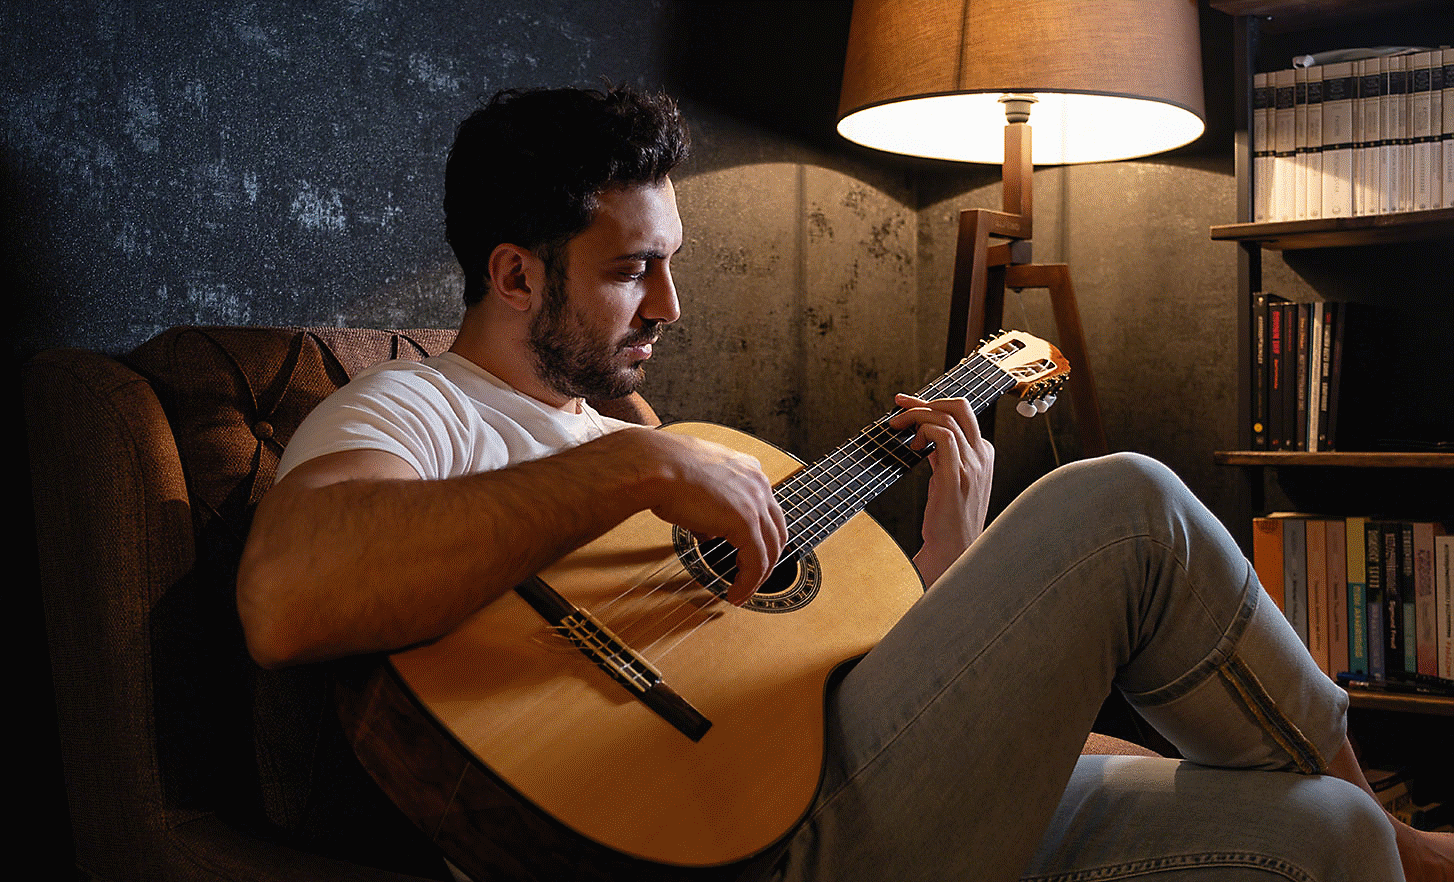 Image of a person playing guitar in an arm chair